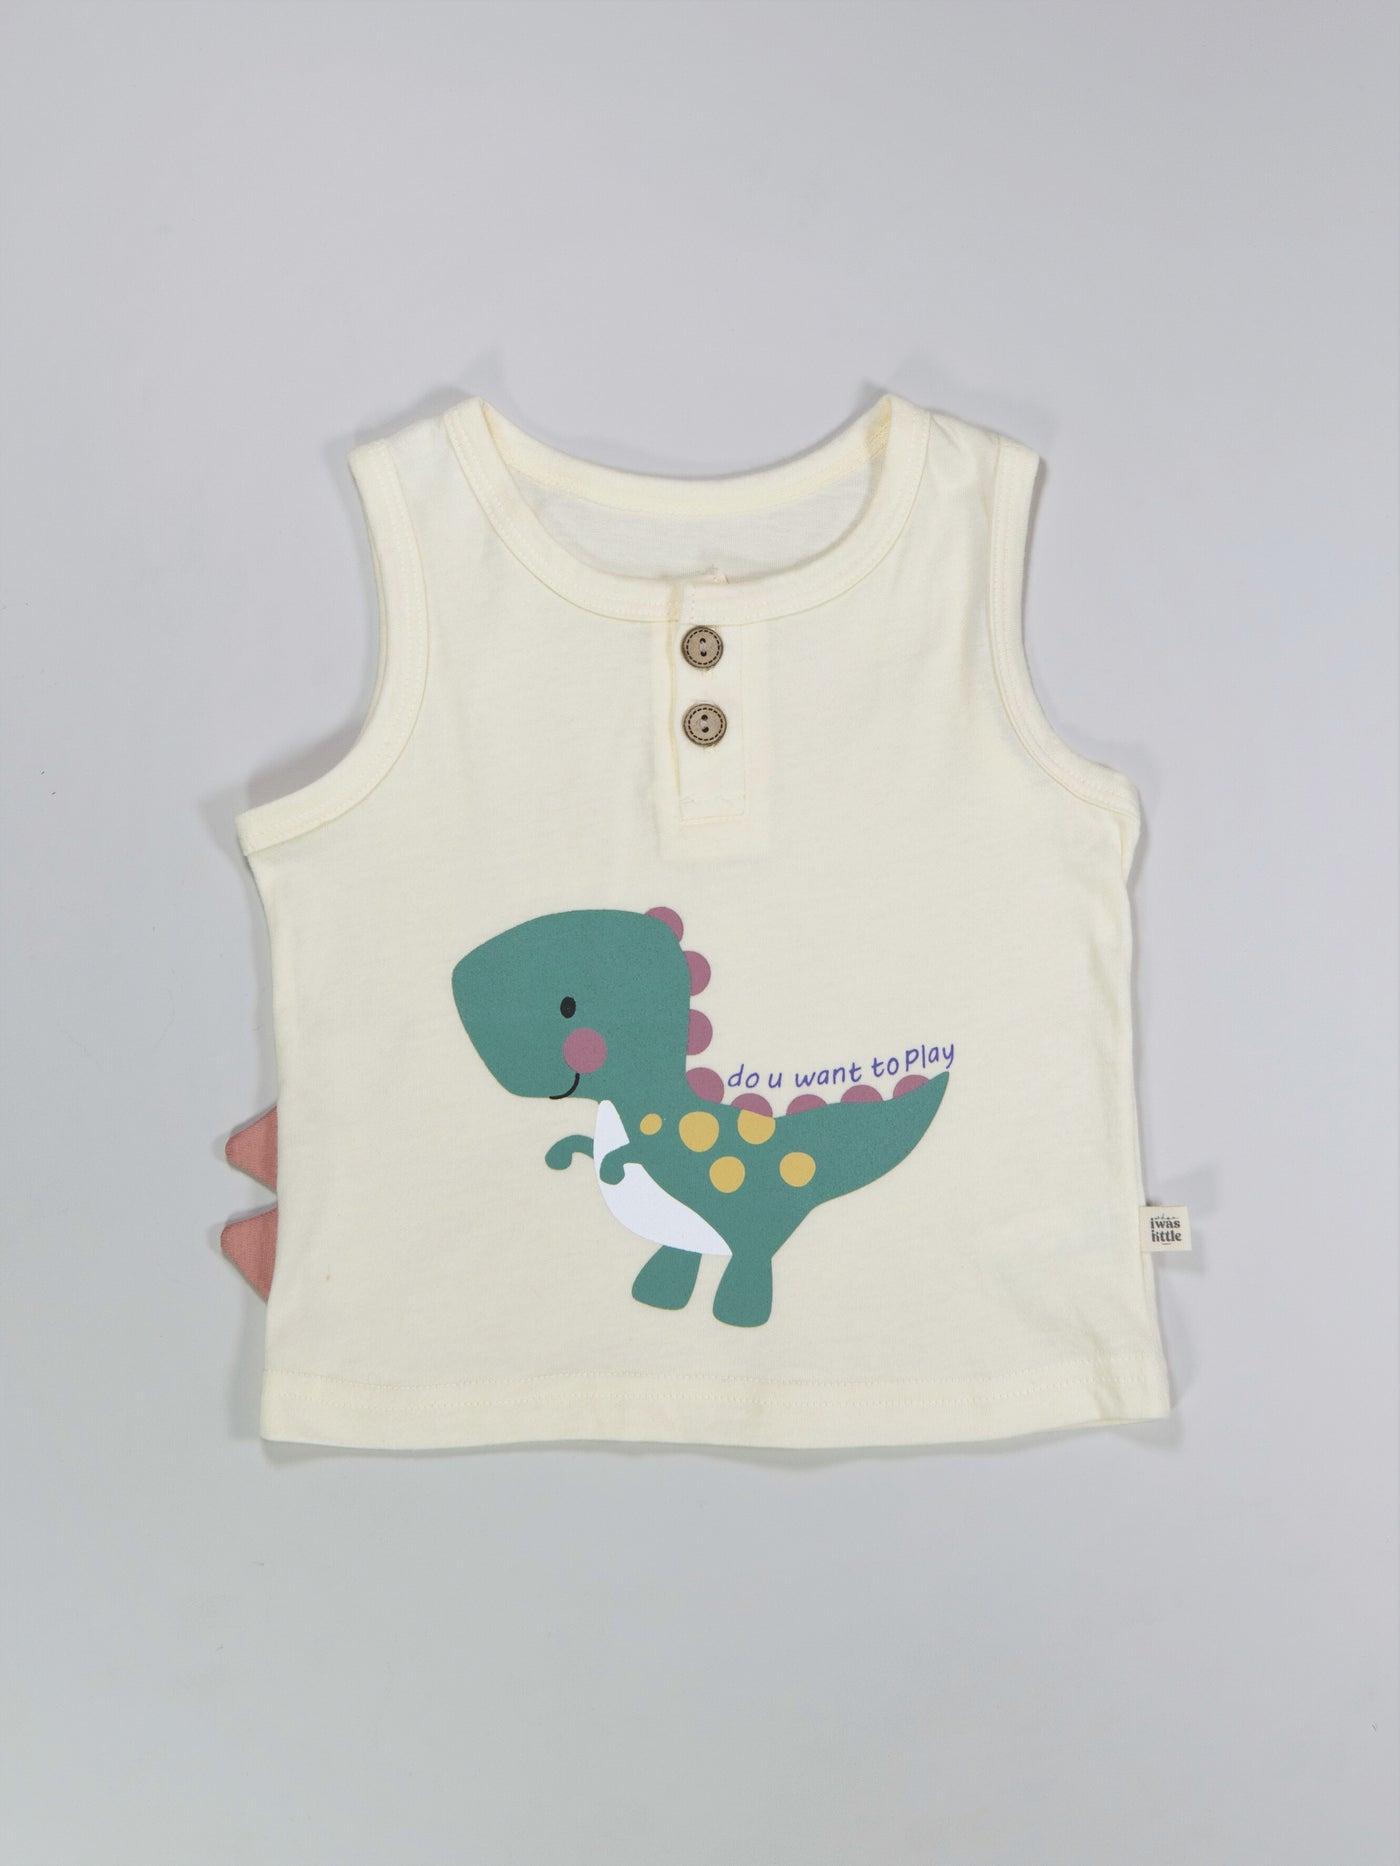 dinosaur printed sleeveless singlet top for kids, baby and toddlers